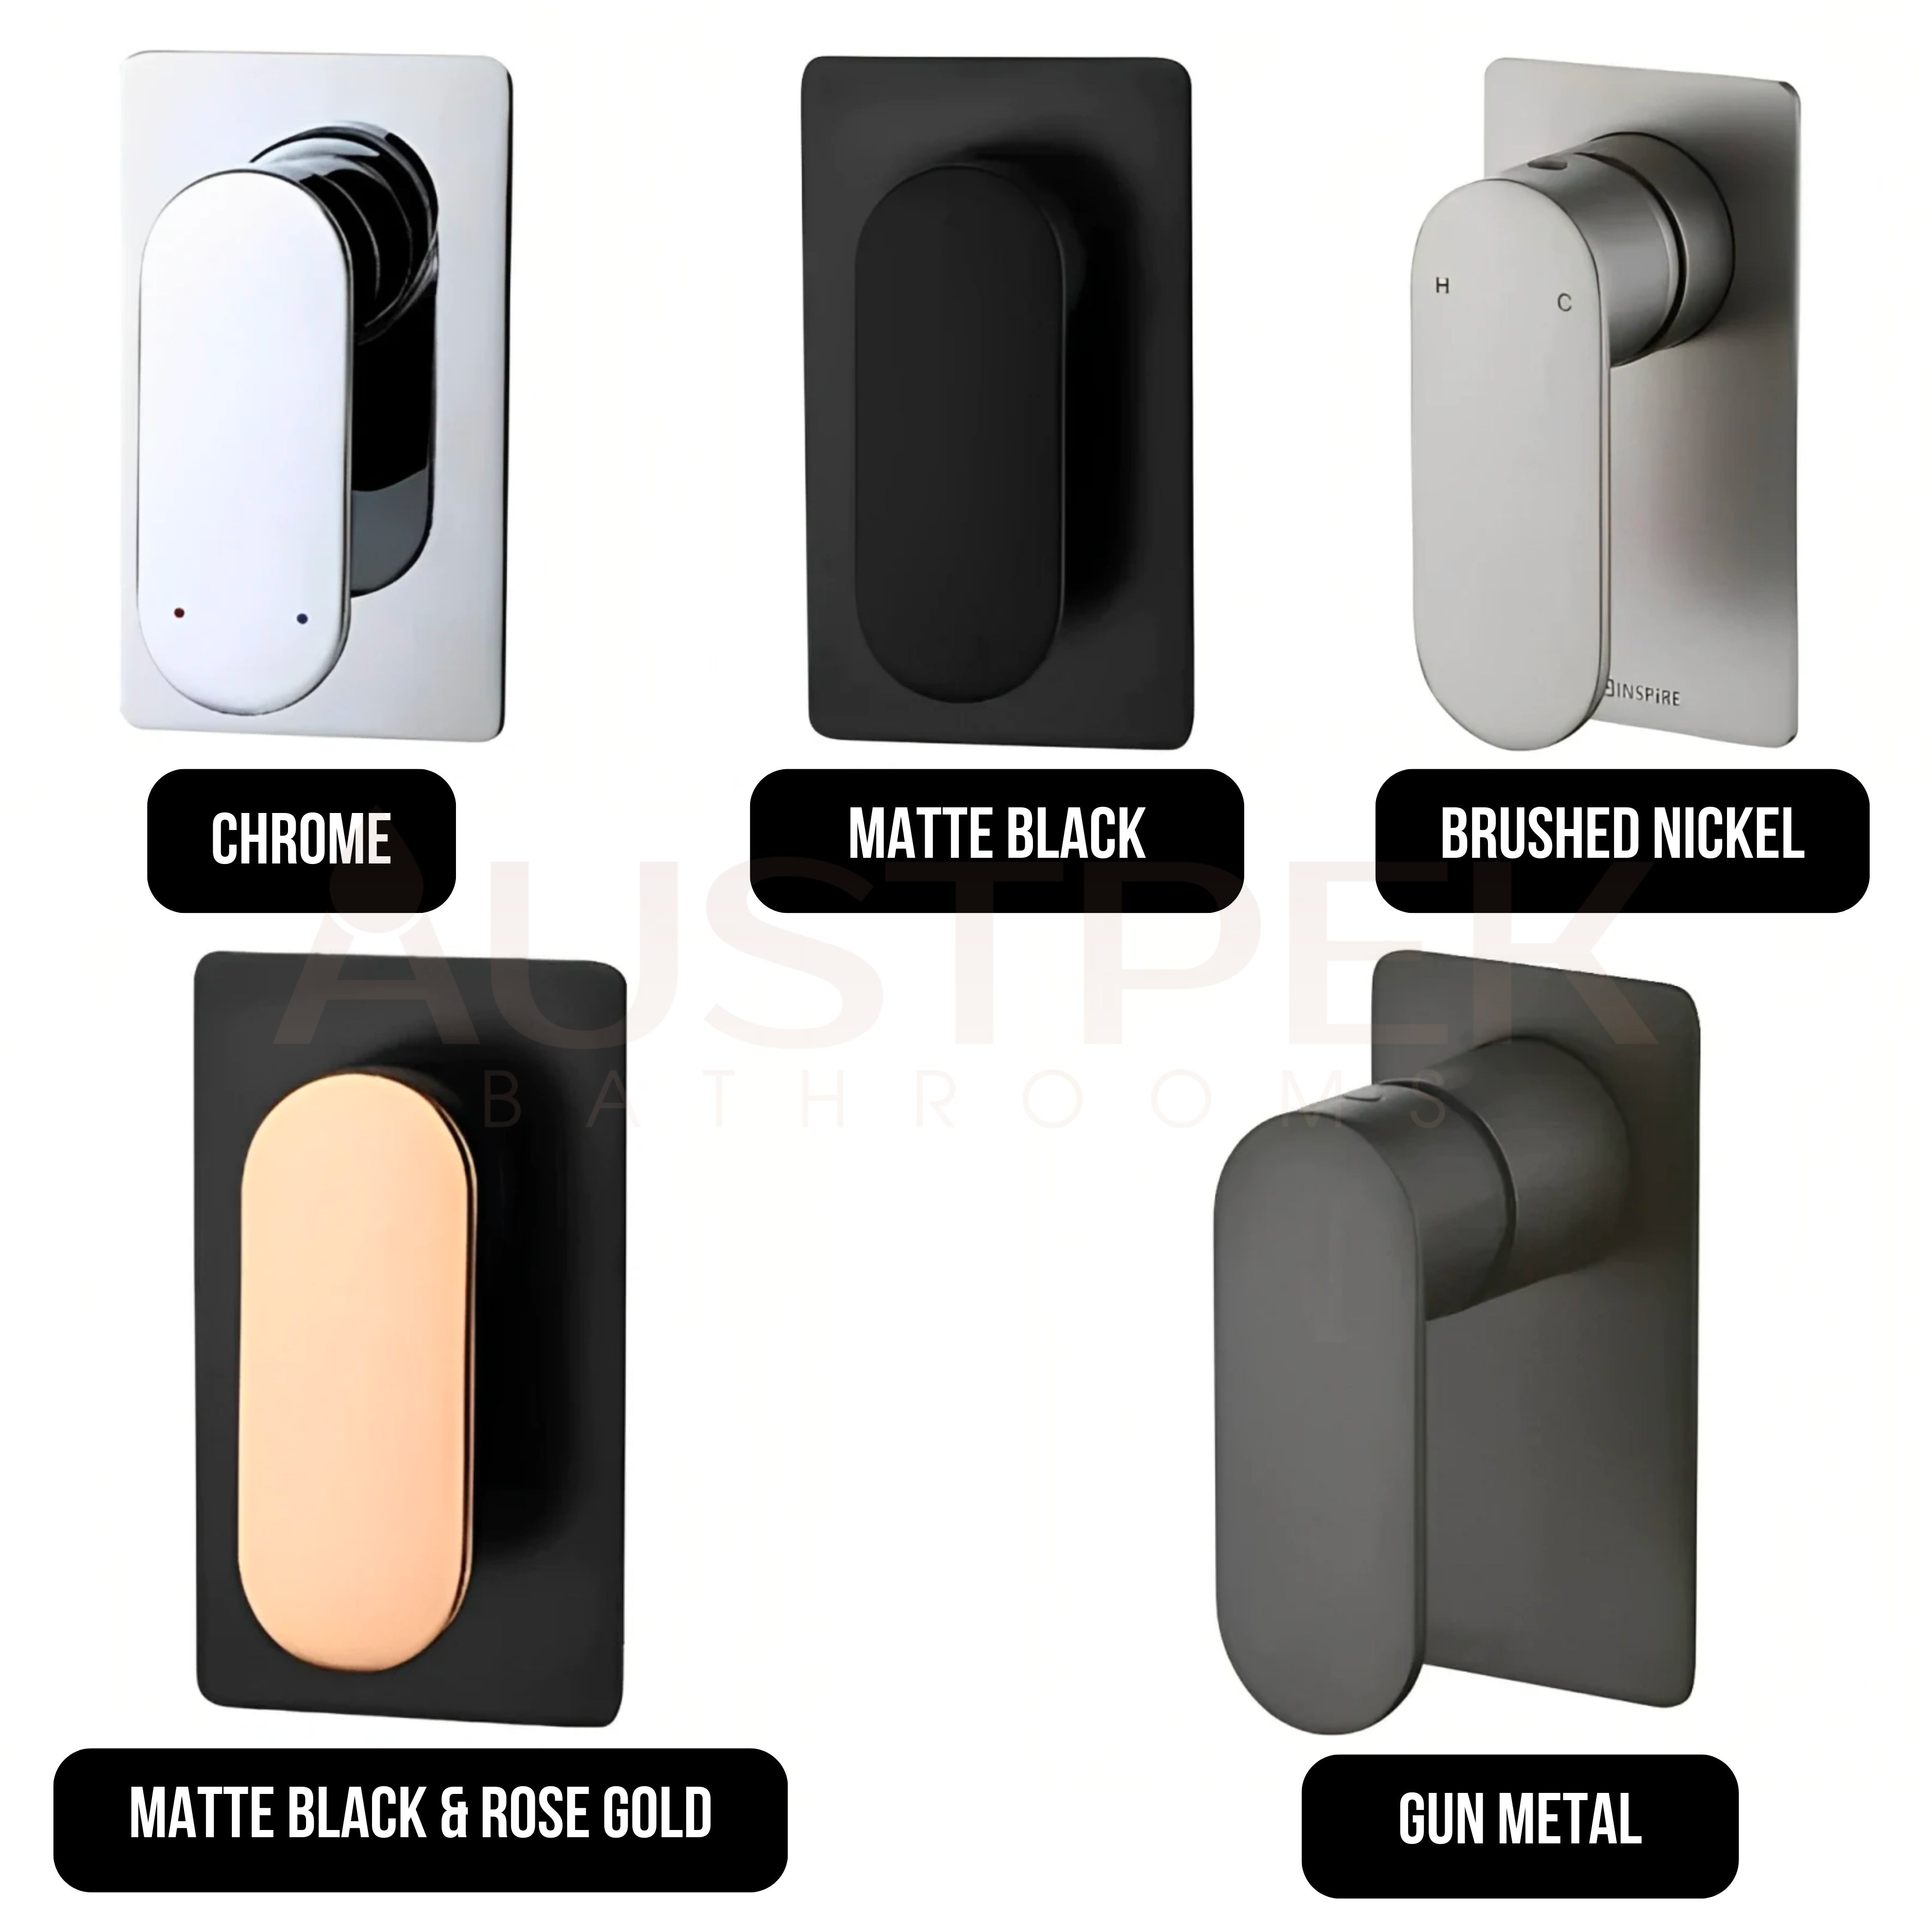 INSPIRE VETTO SHOWER WALL MIXER MATTE BLACK AND ROSE GOLD